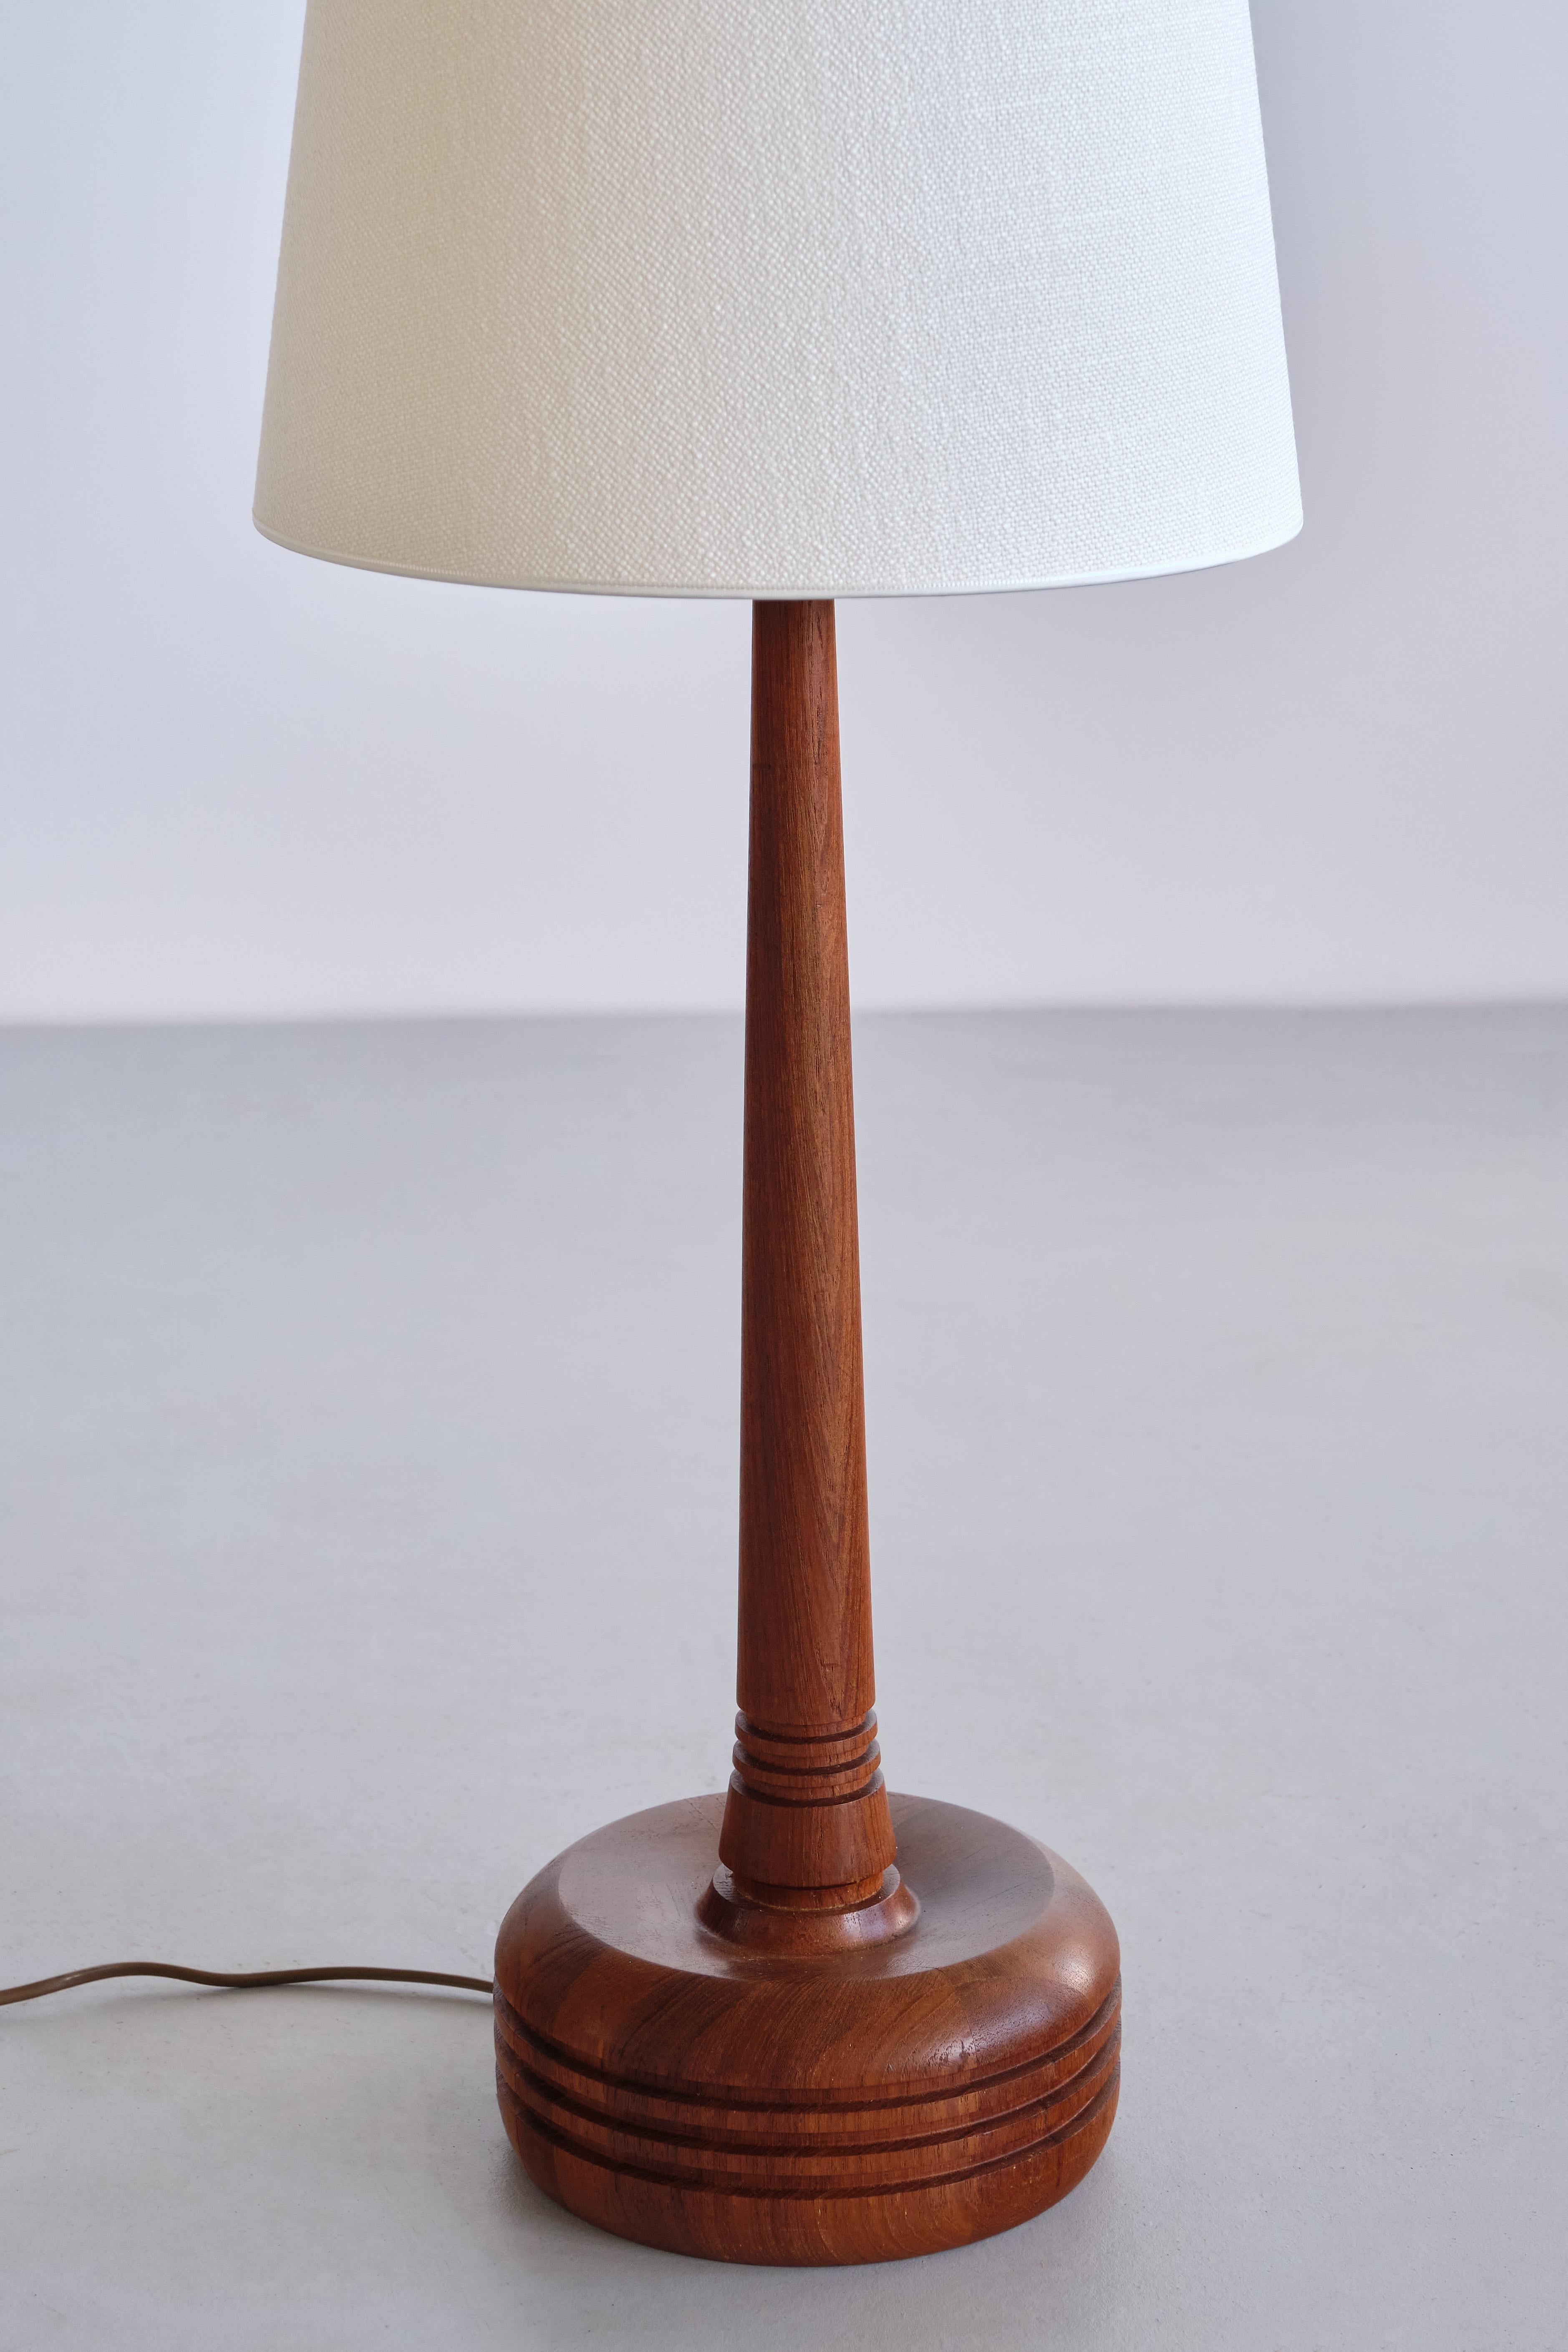 Tall Stilarmatur Tranås Table Lamp in Teak Wood with Cone Shade, Sweden, 1960s In Good Condition For Sale In The Hague, NL